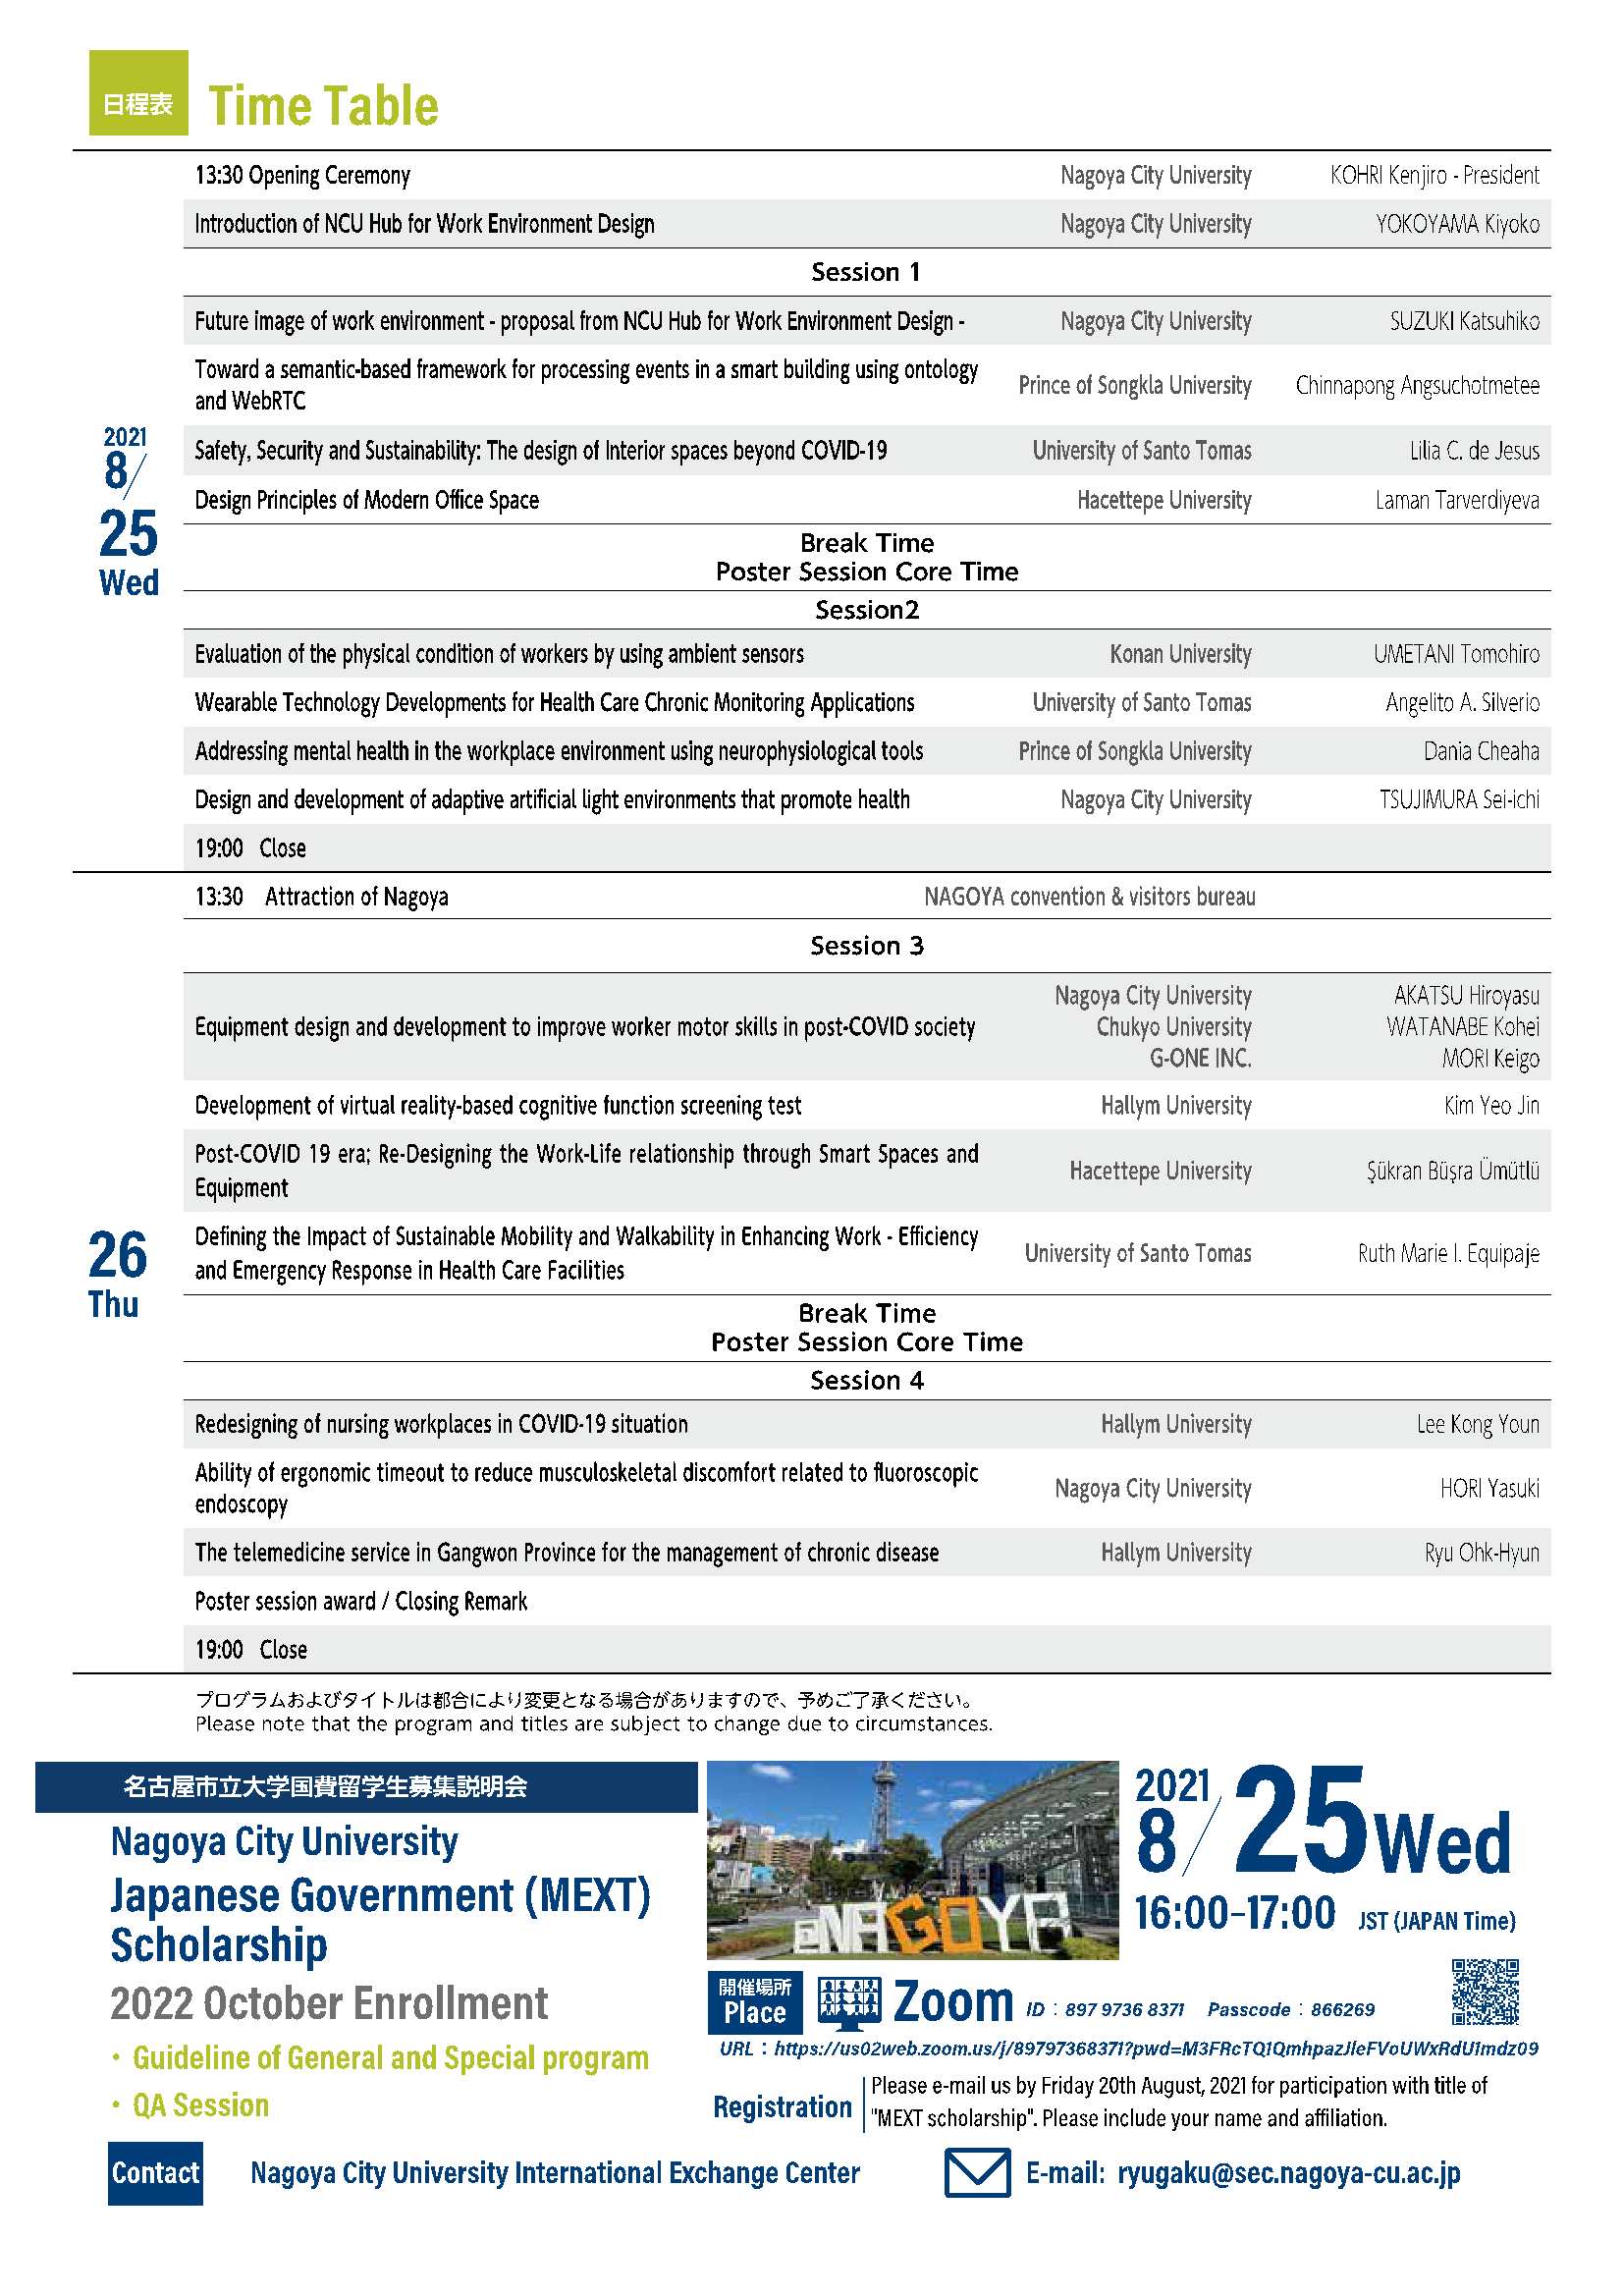 2nd NCU Contact Points in Asia Symposium 2021(time table)